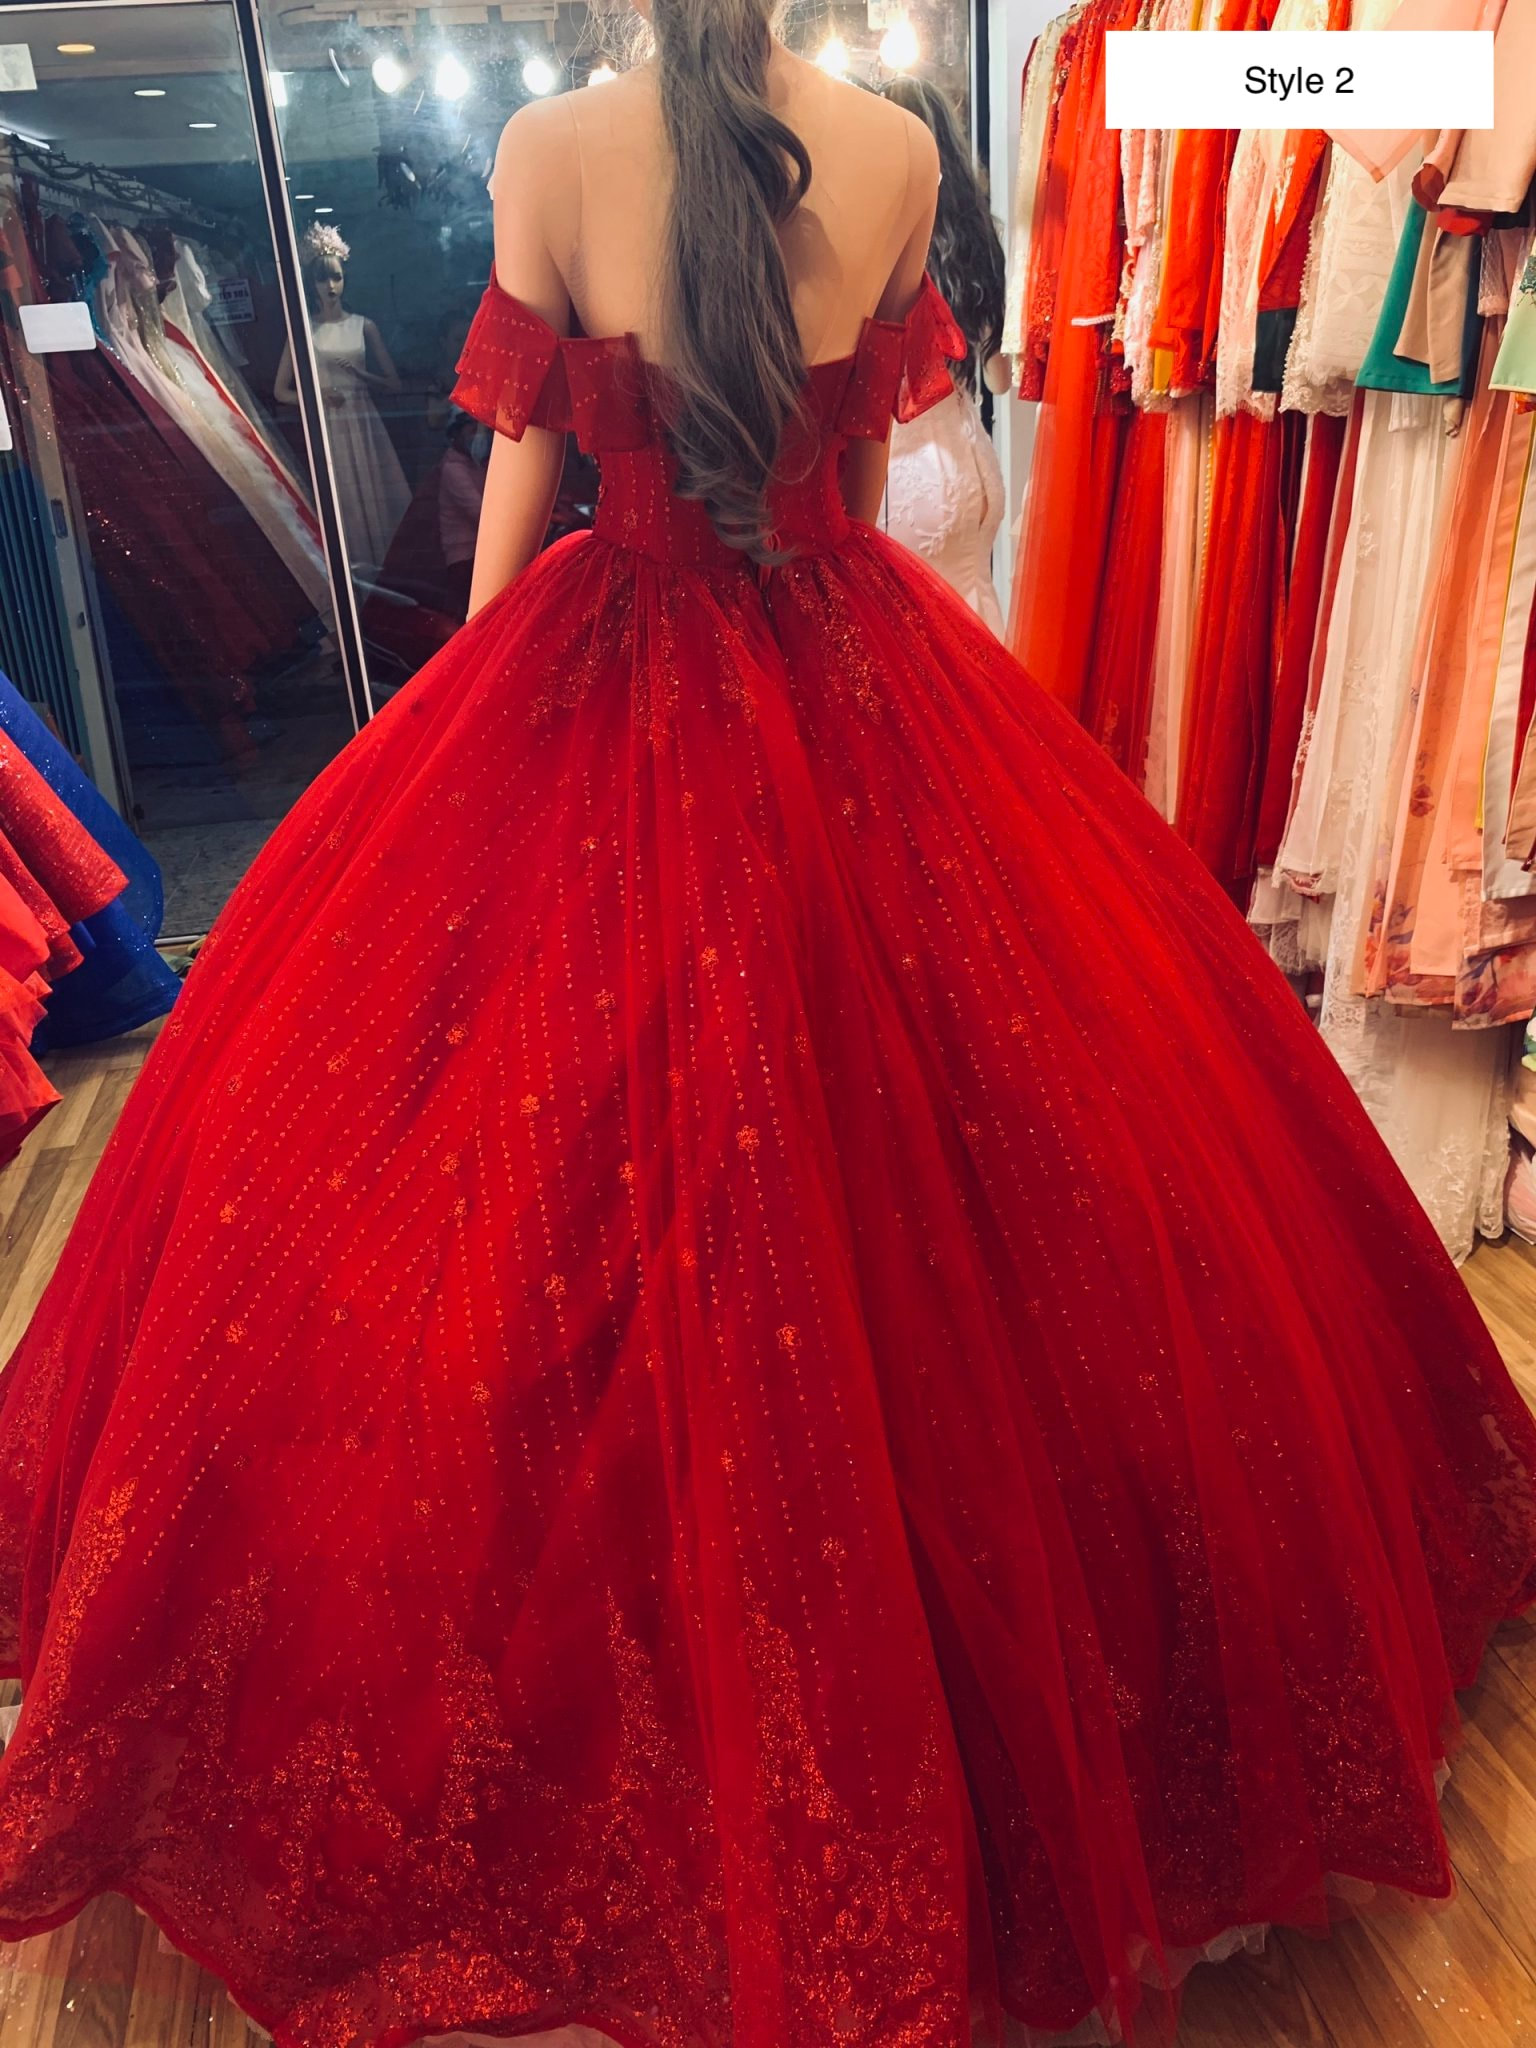 Red Princess ball gown with tulle skirt by Lafanta | Braut- und Abendmode-pokeht.vn